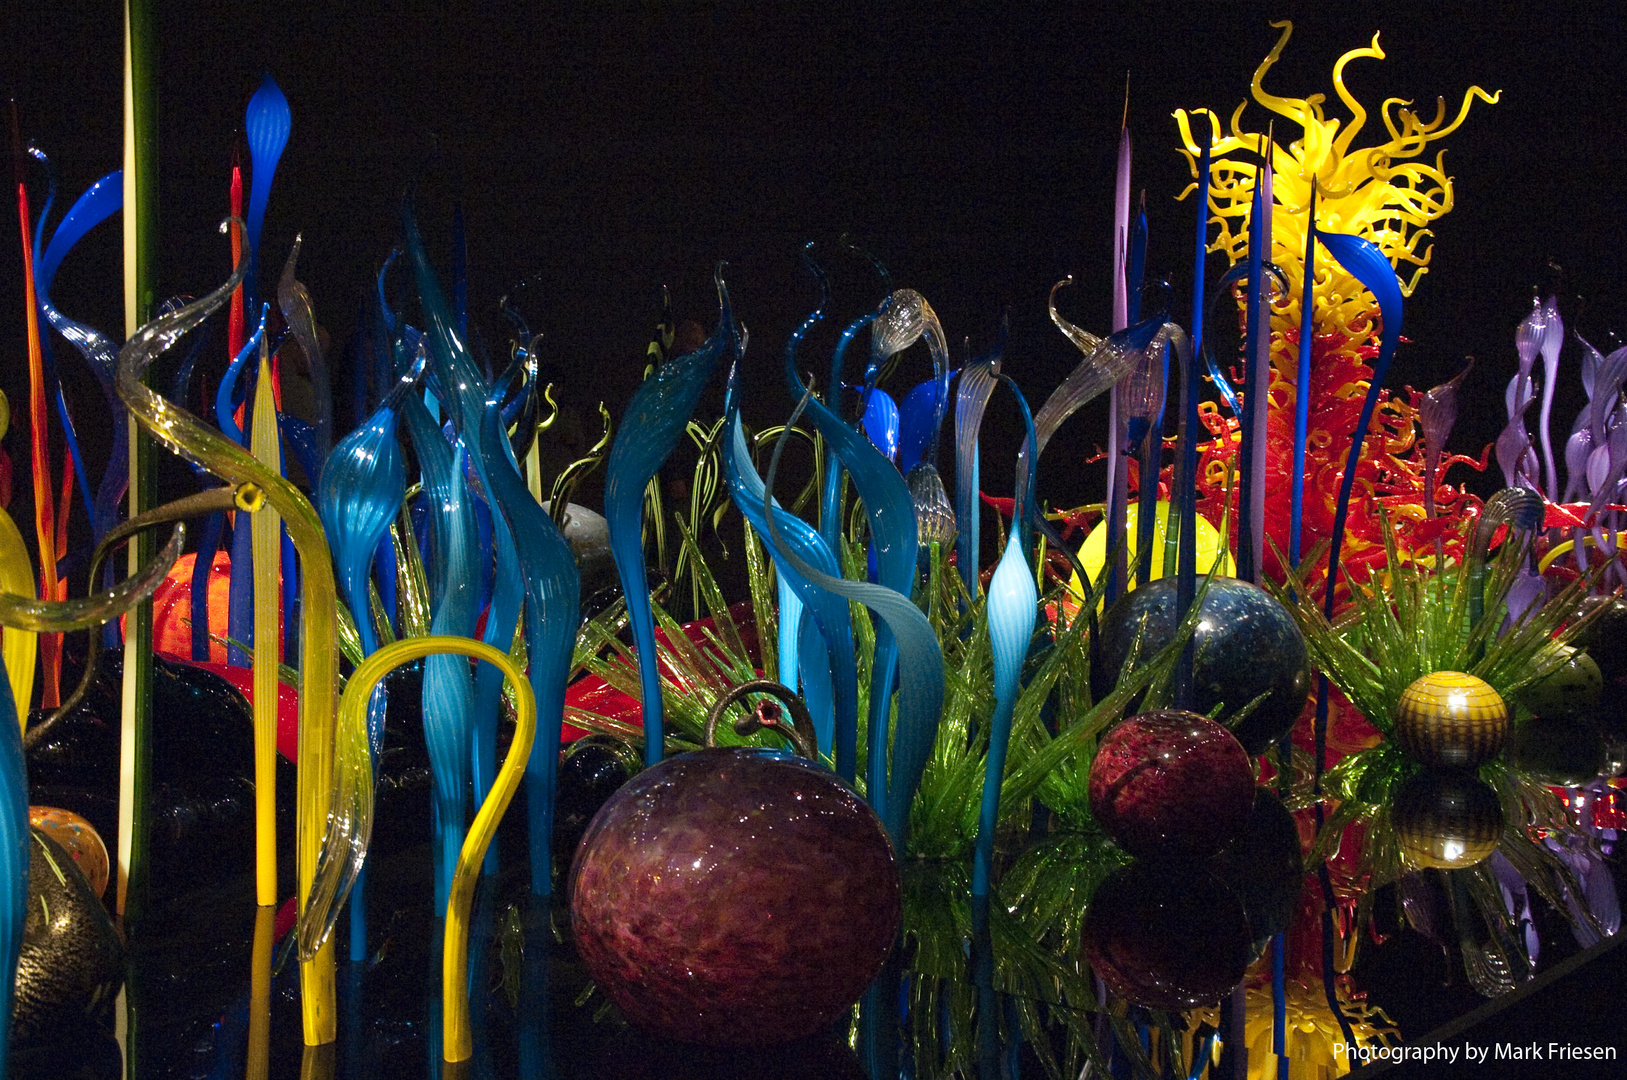 Chihuly Art Exhibit